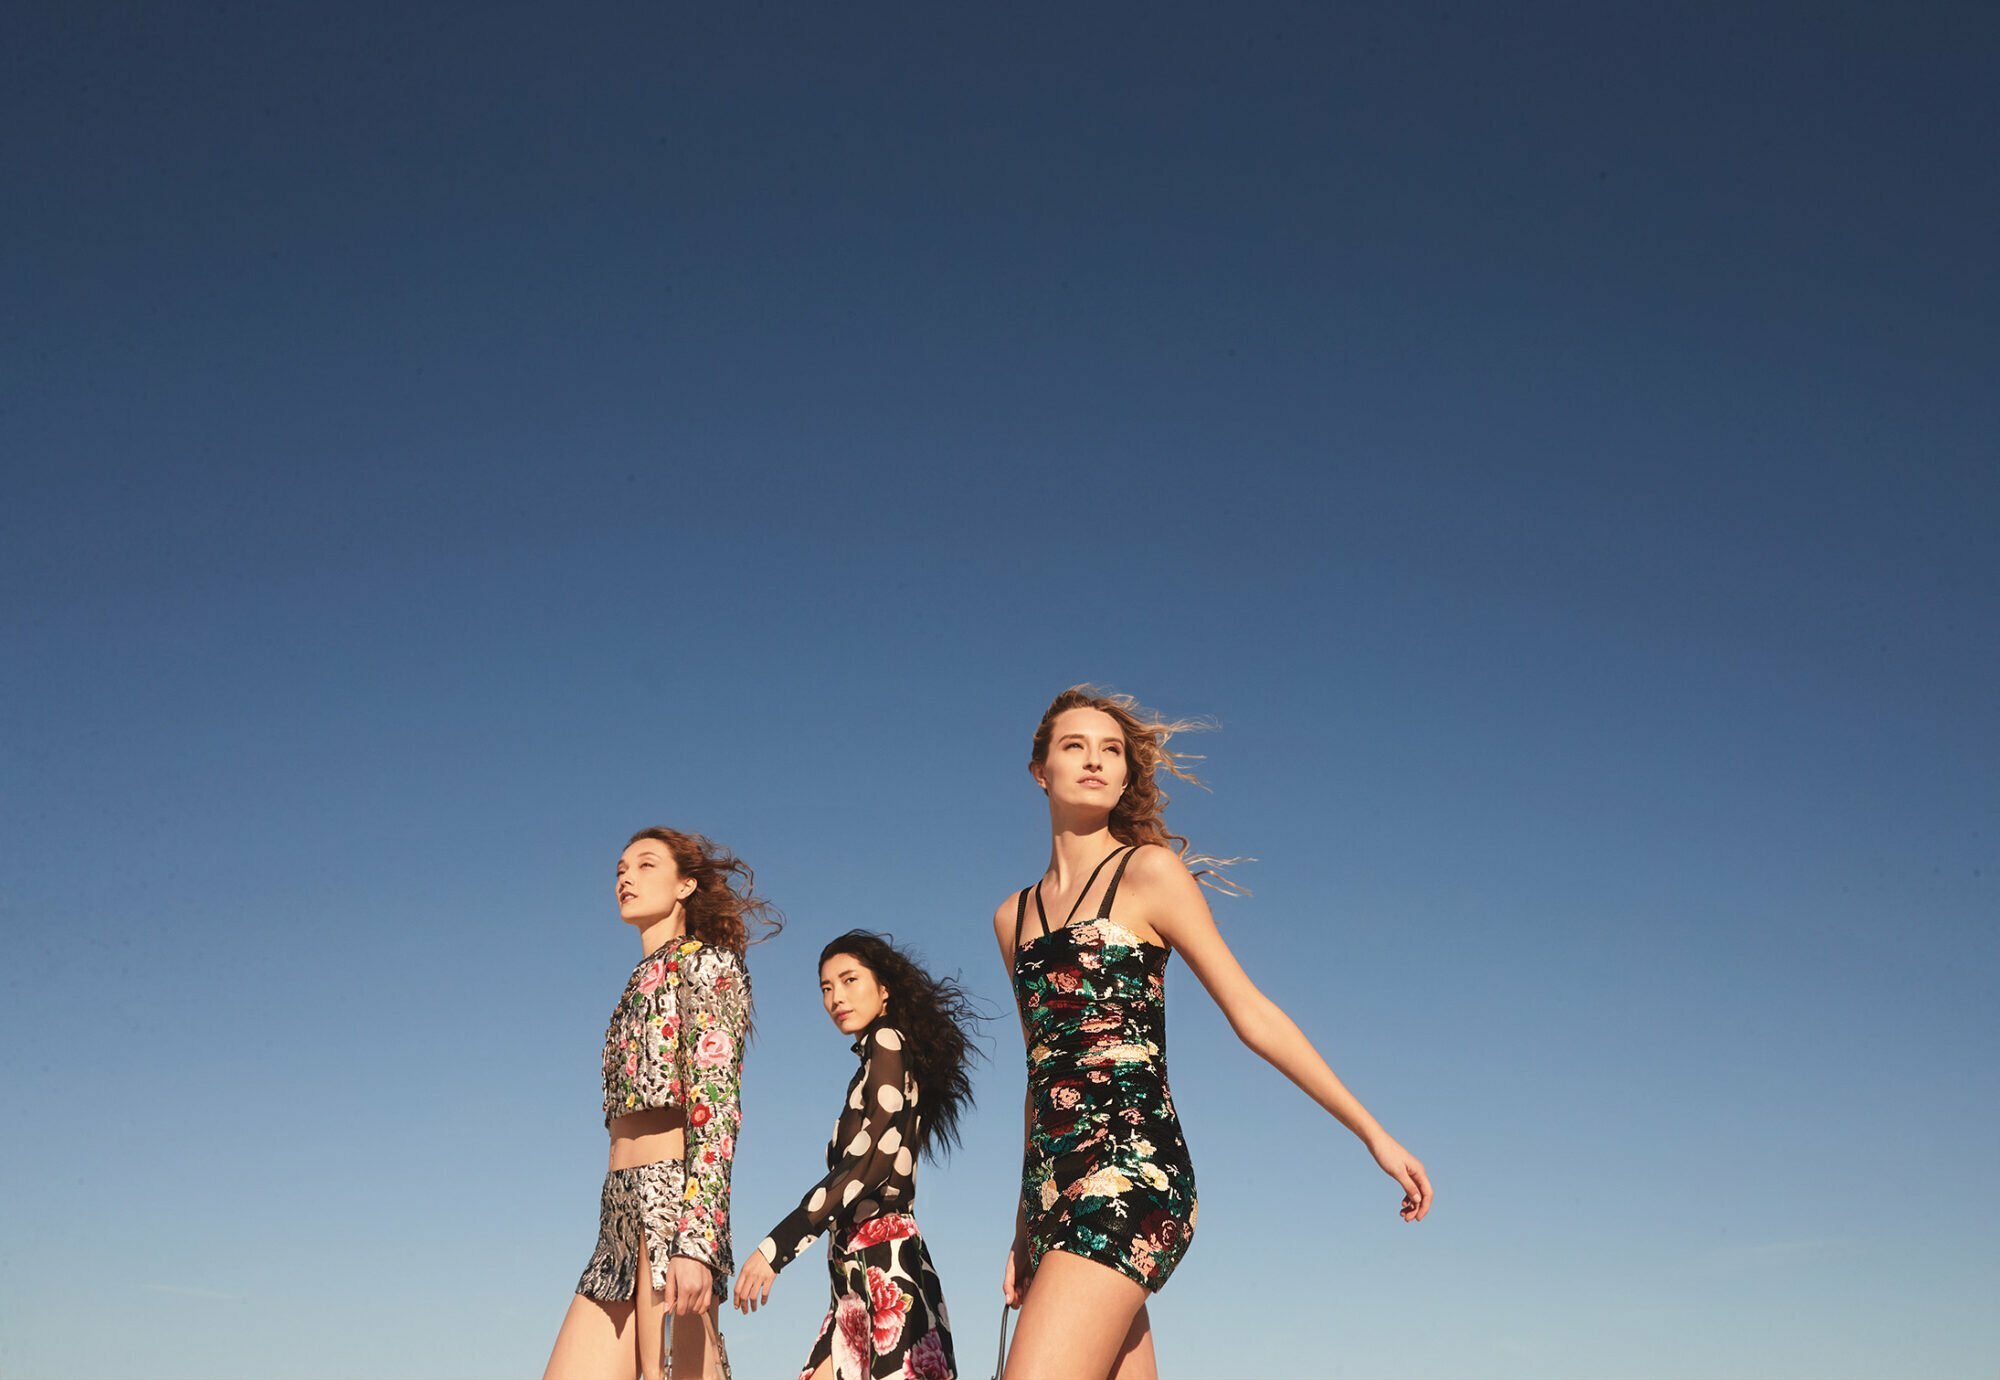 Neiman Marcus Spring 2022 Campaign: Looking Forward, Forward Looking - Dolce & Gabbana